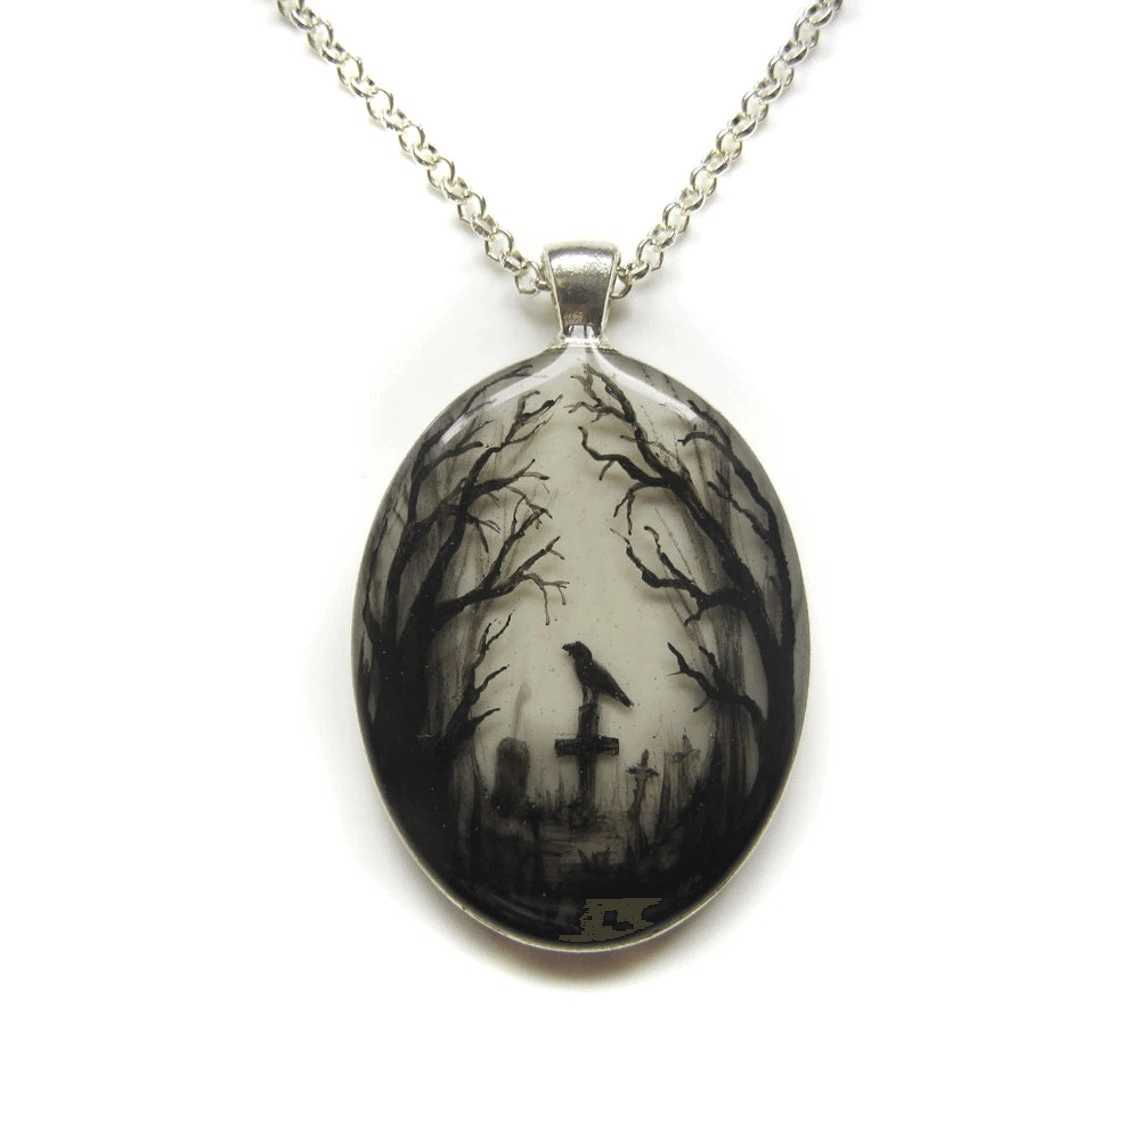 Gloomy Wood Graveyard Hand Painted Oval Pendant / Gothic Style Chain with Mystic Pendant